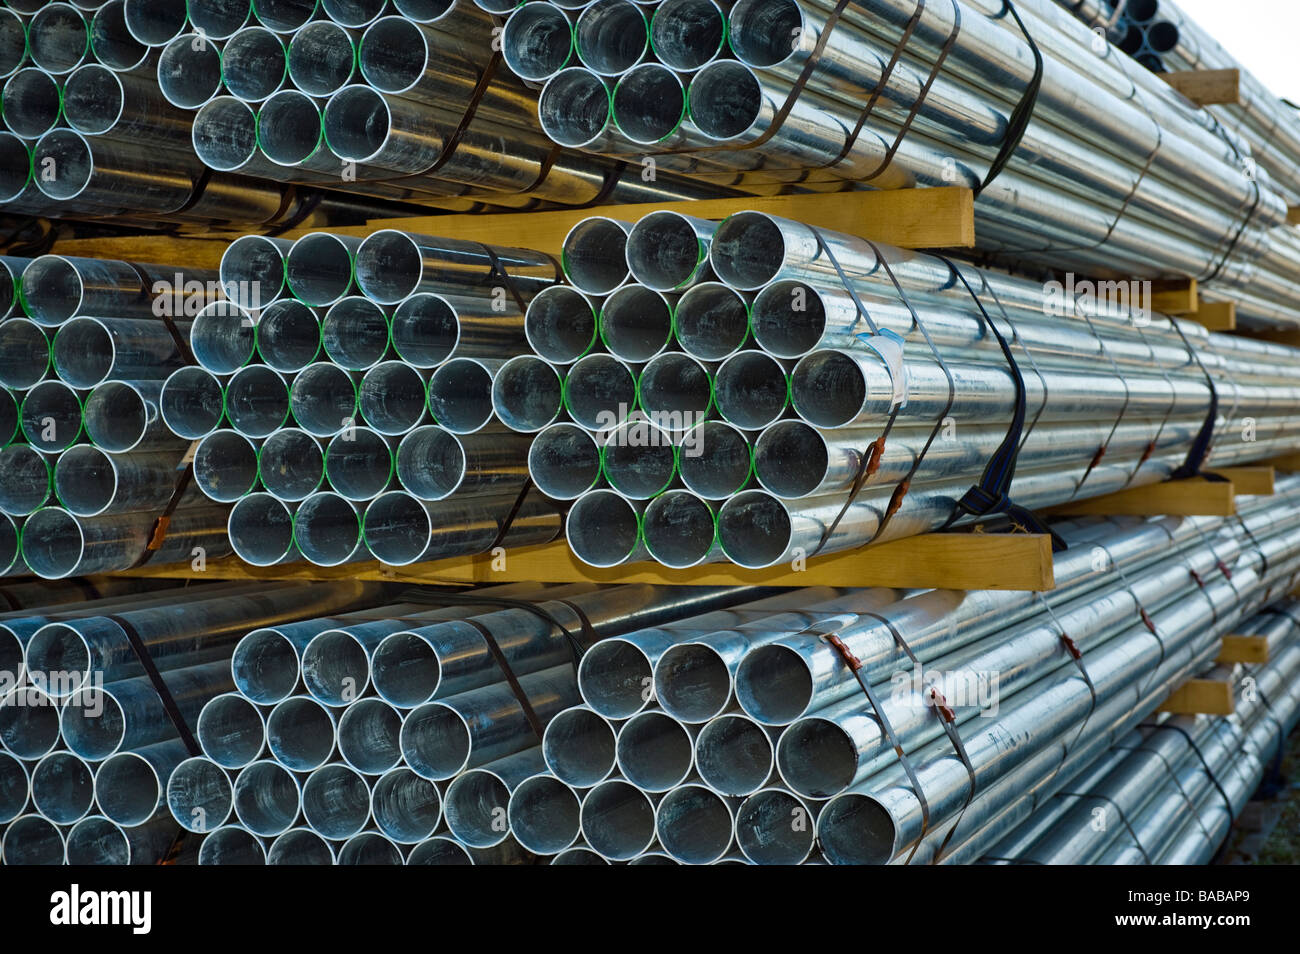 pipework plumbing iron steel tube pipe duct tubes in mill lengths sell seller stor storage industry trade tarding commerce traff Stock Photo